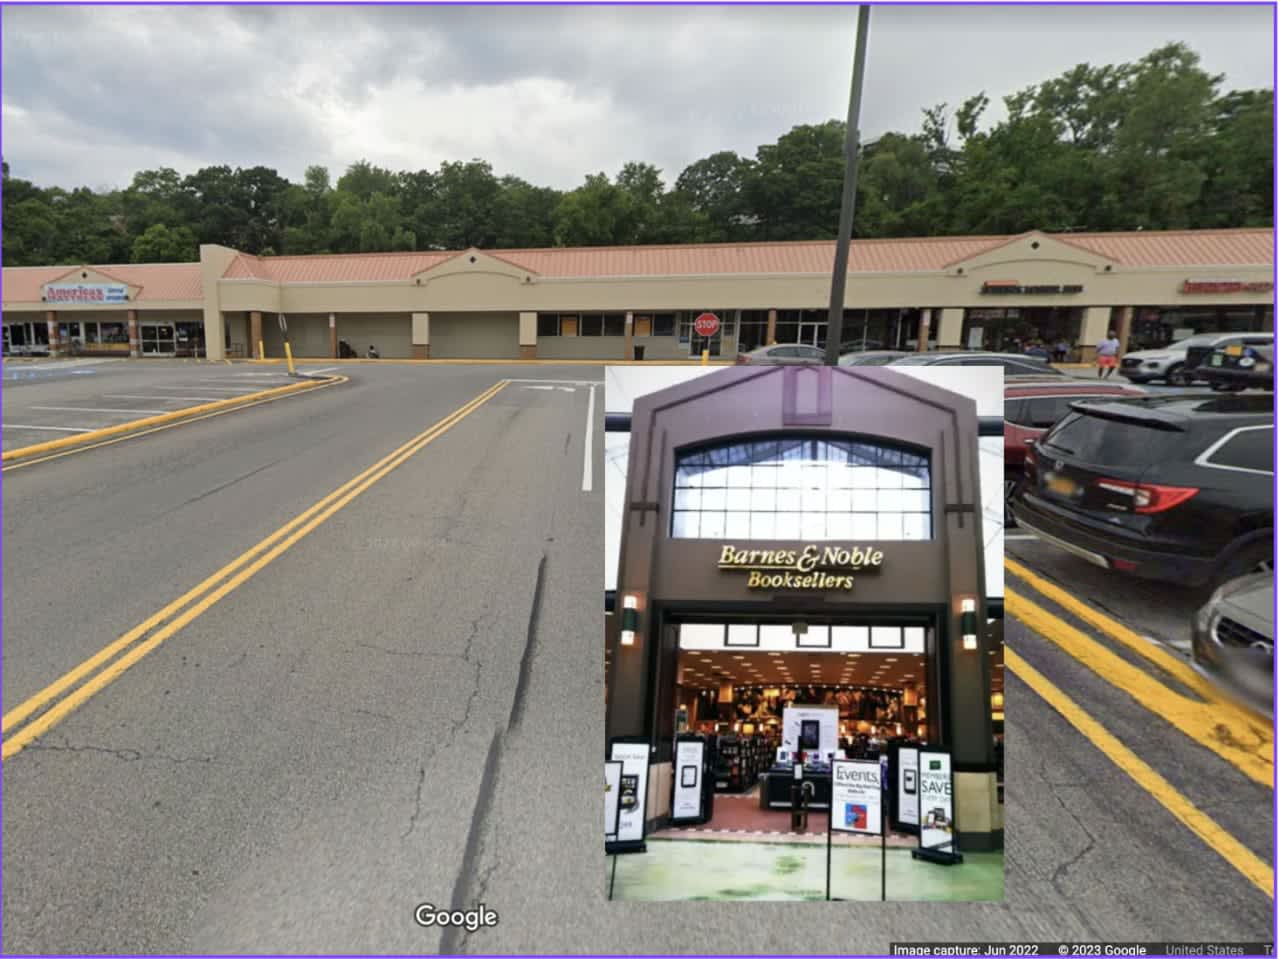 Barnes & Noble is opening a new store in Hartsdale.